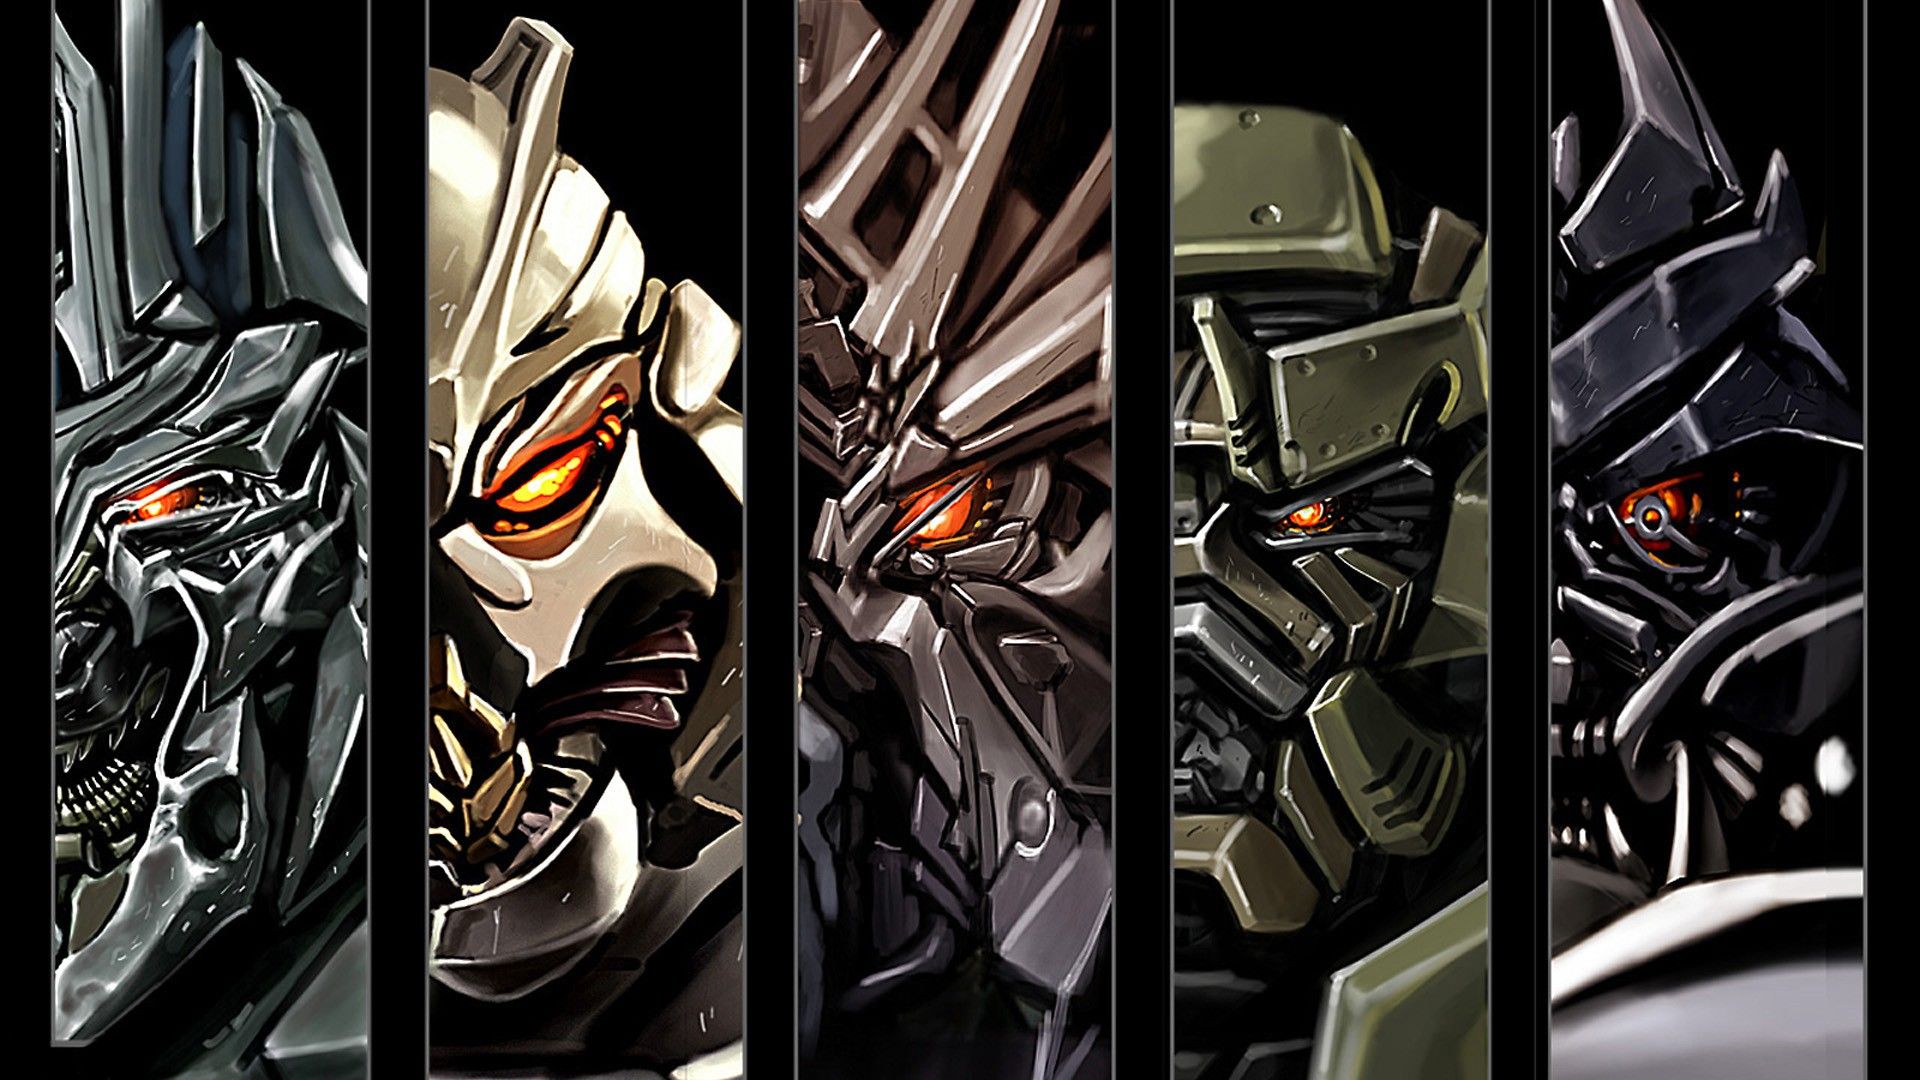 Decepticons, other, sizes, pixels, papers, wallpaper, transformers, movie, collection